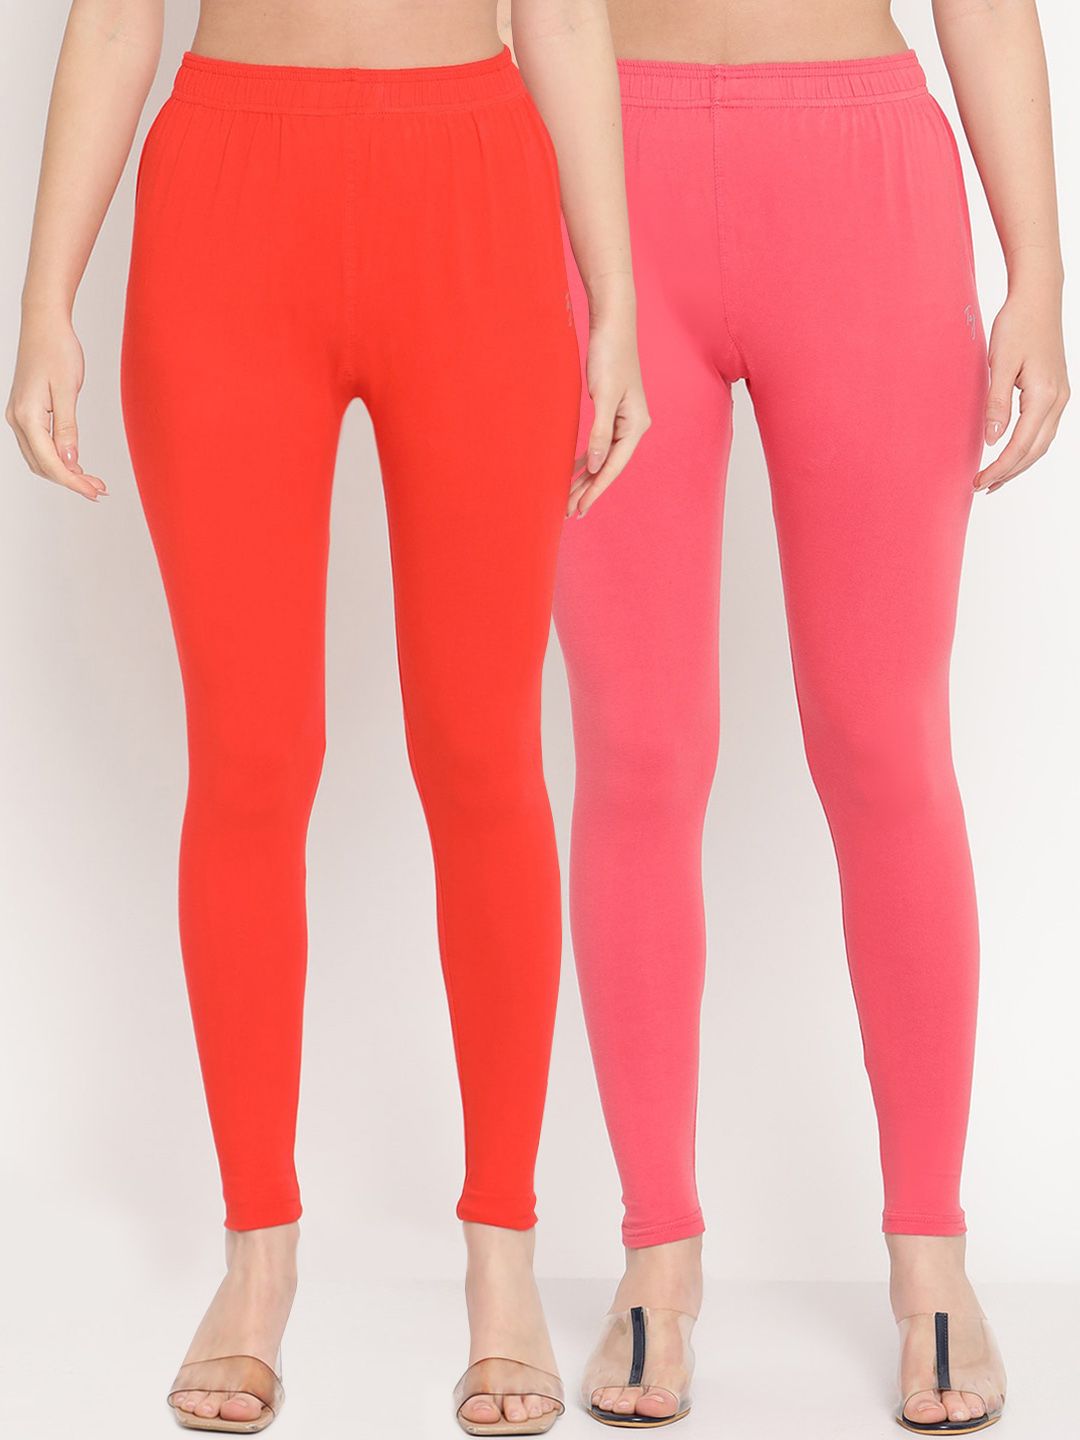 TAG 7 Women Pack Of 2 Orange & Pink Solid Ankle-Length Leggings Price in India